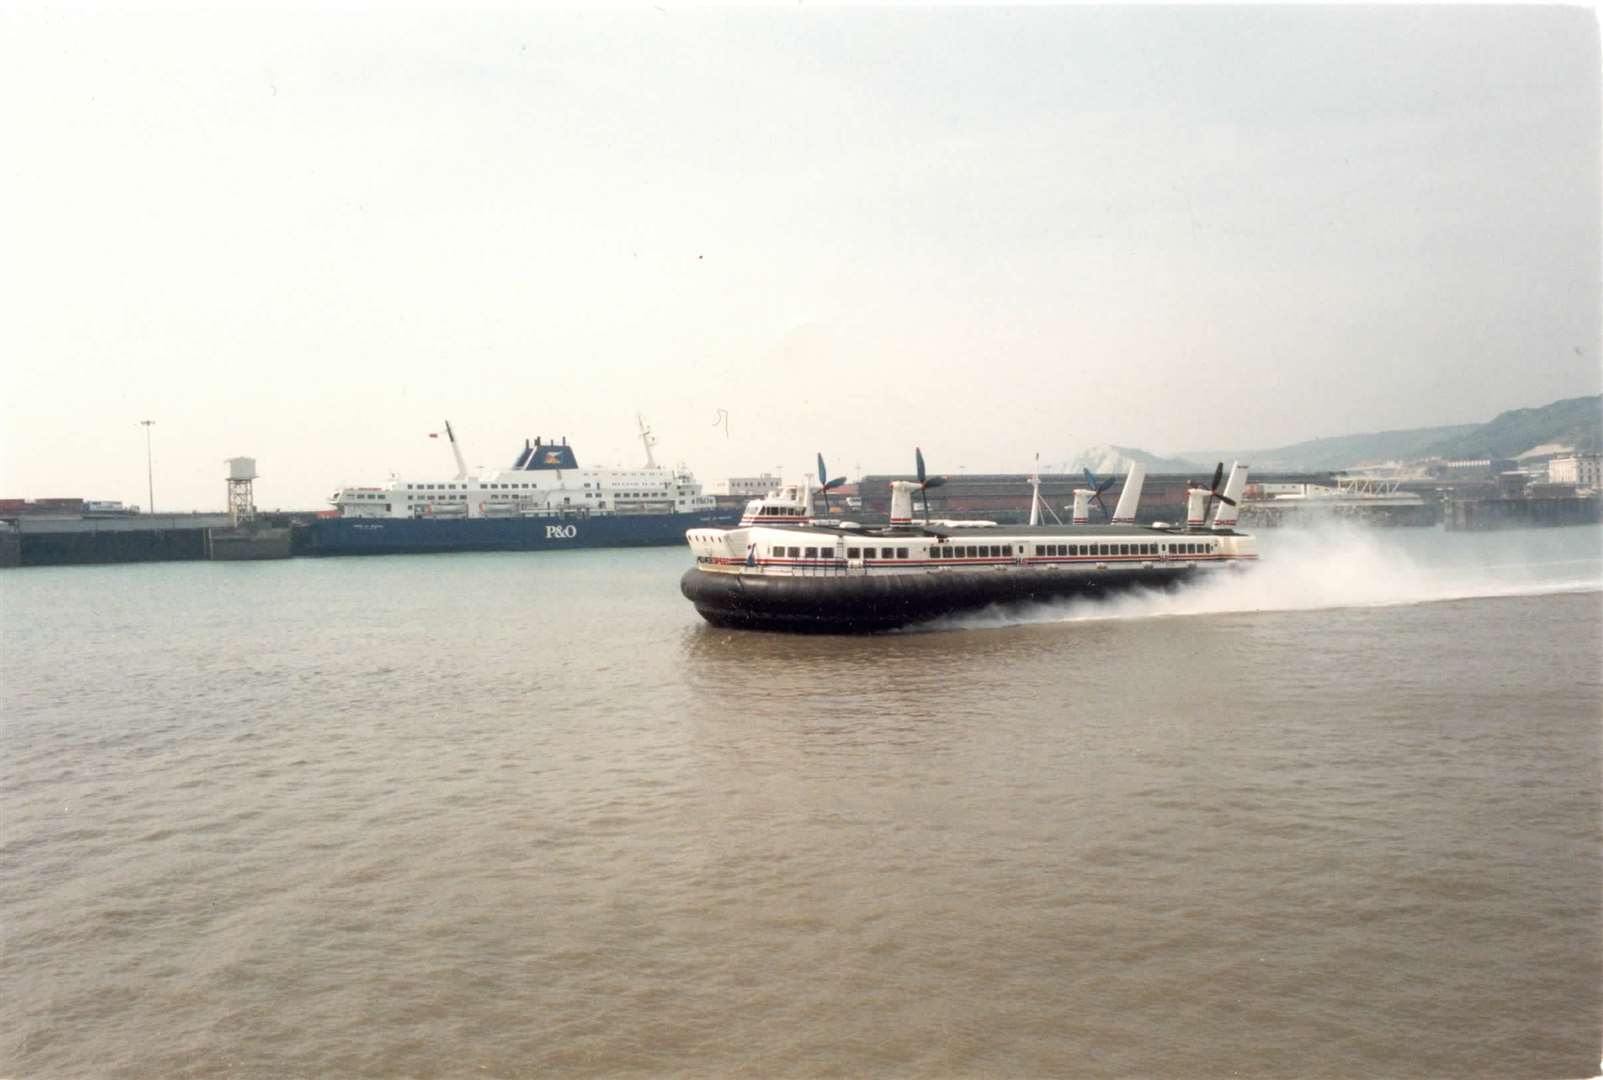 Dover Hoverport pictured on April 30, 1993. The hovercraft ran between Dover and Calais from 1981 to 2005. It closed after years of suffering losses due to tough competition from the Channel Tunnel. A Folkestone to Boulogne service also ran from 1993 to 2000